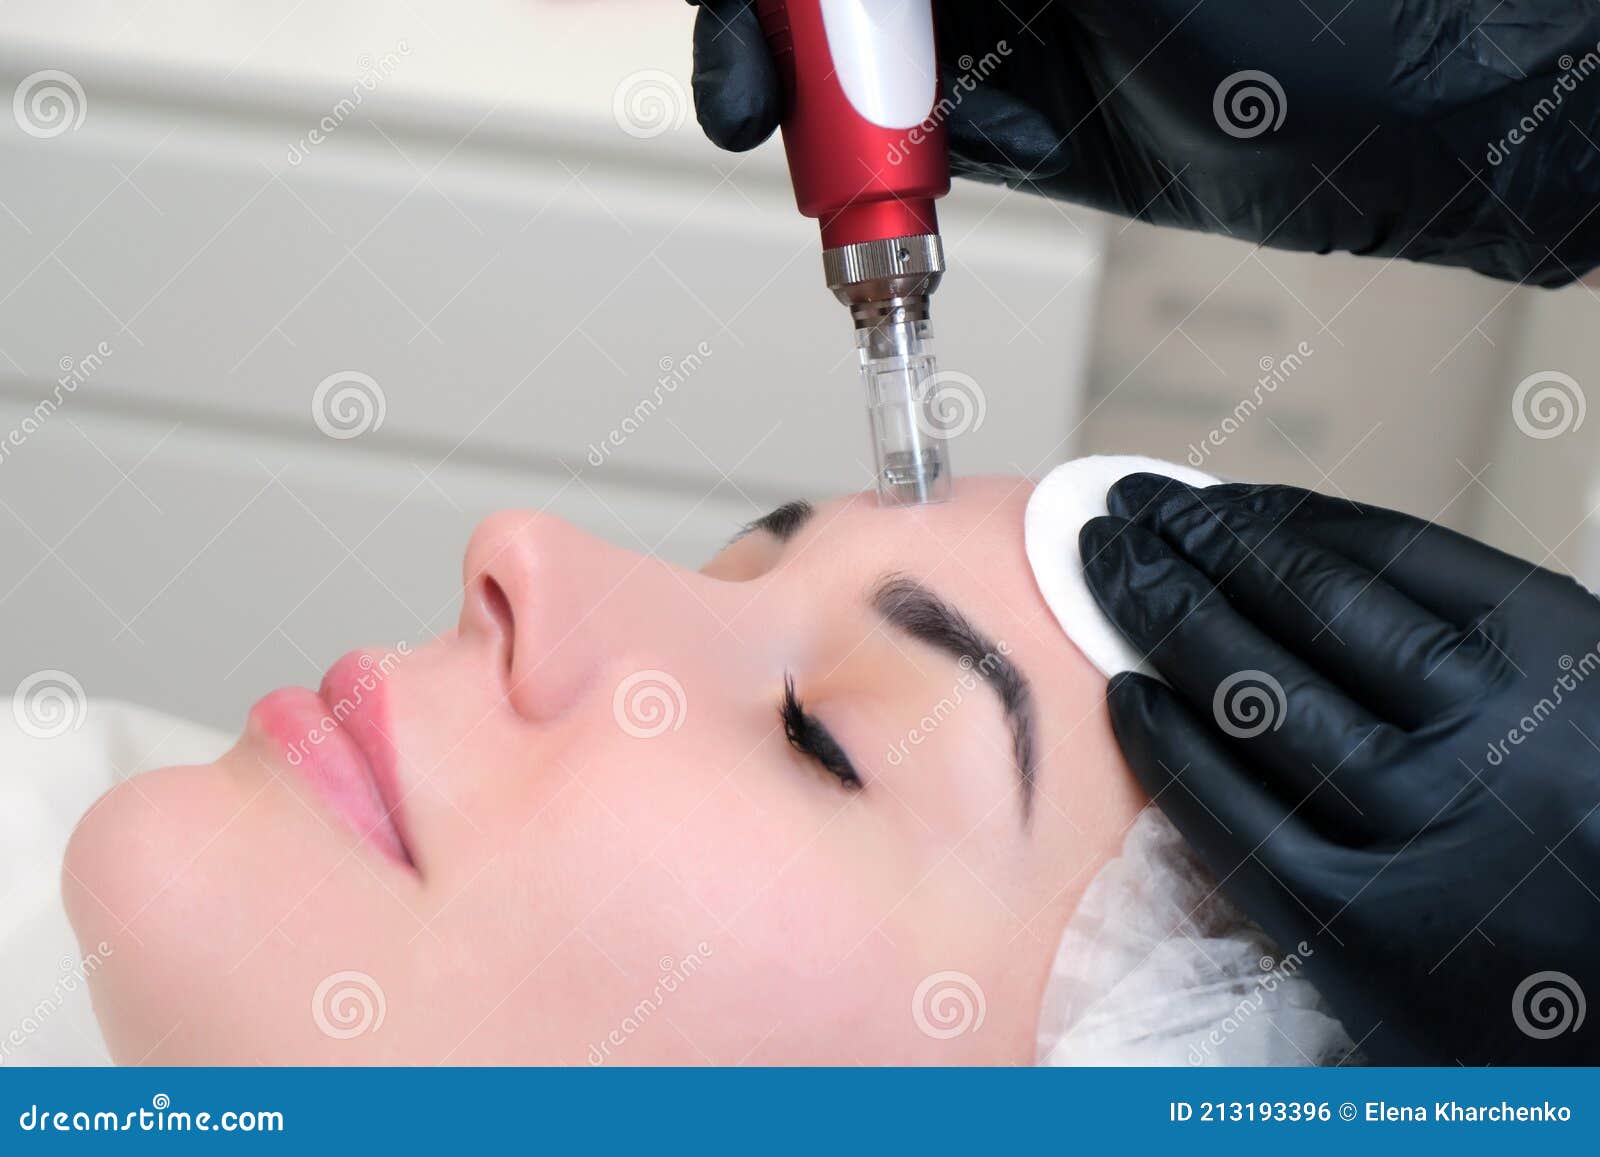 needle mesotherapy. cosmetologist performs needle mesotherapy on a womans face